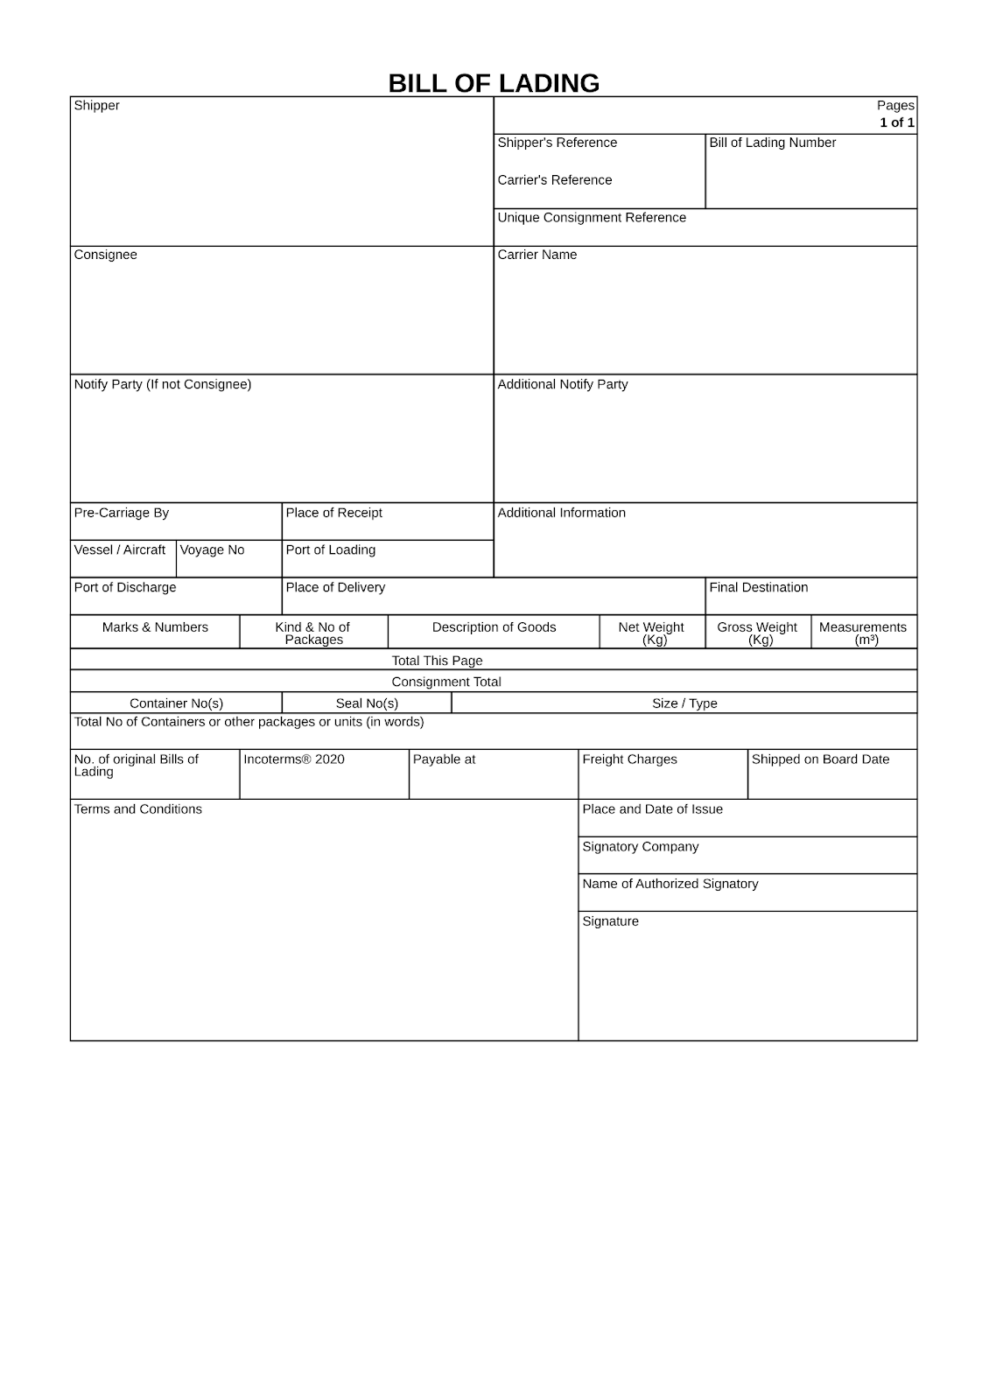 Bill of Lading Template by IncoDocs